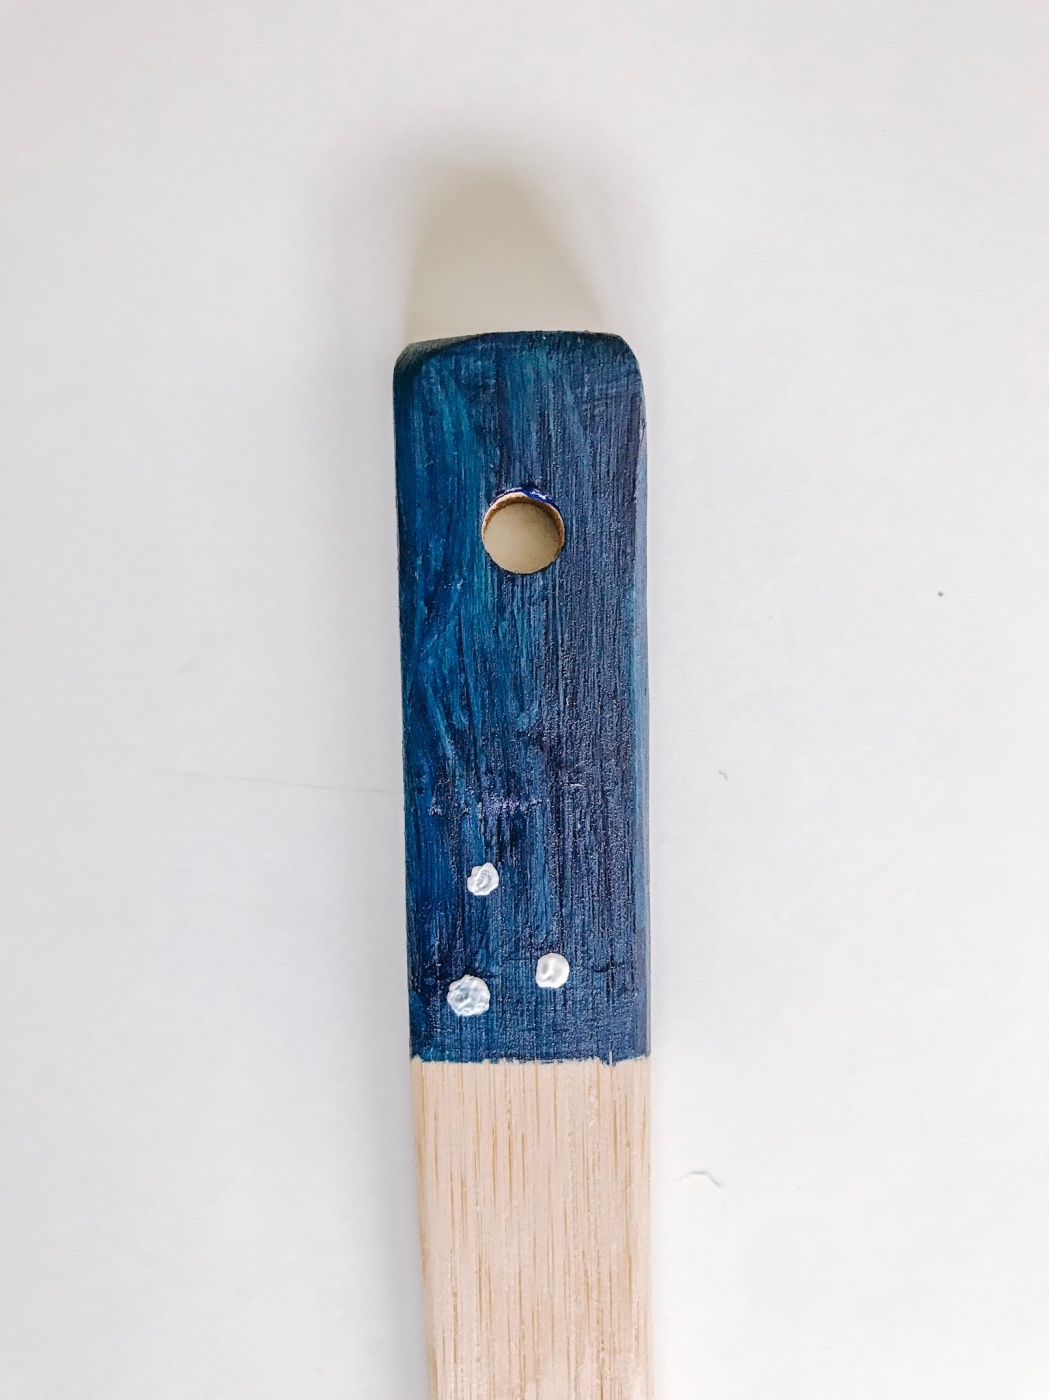 adding polka dots to the blue painted wooden spoon